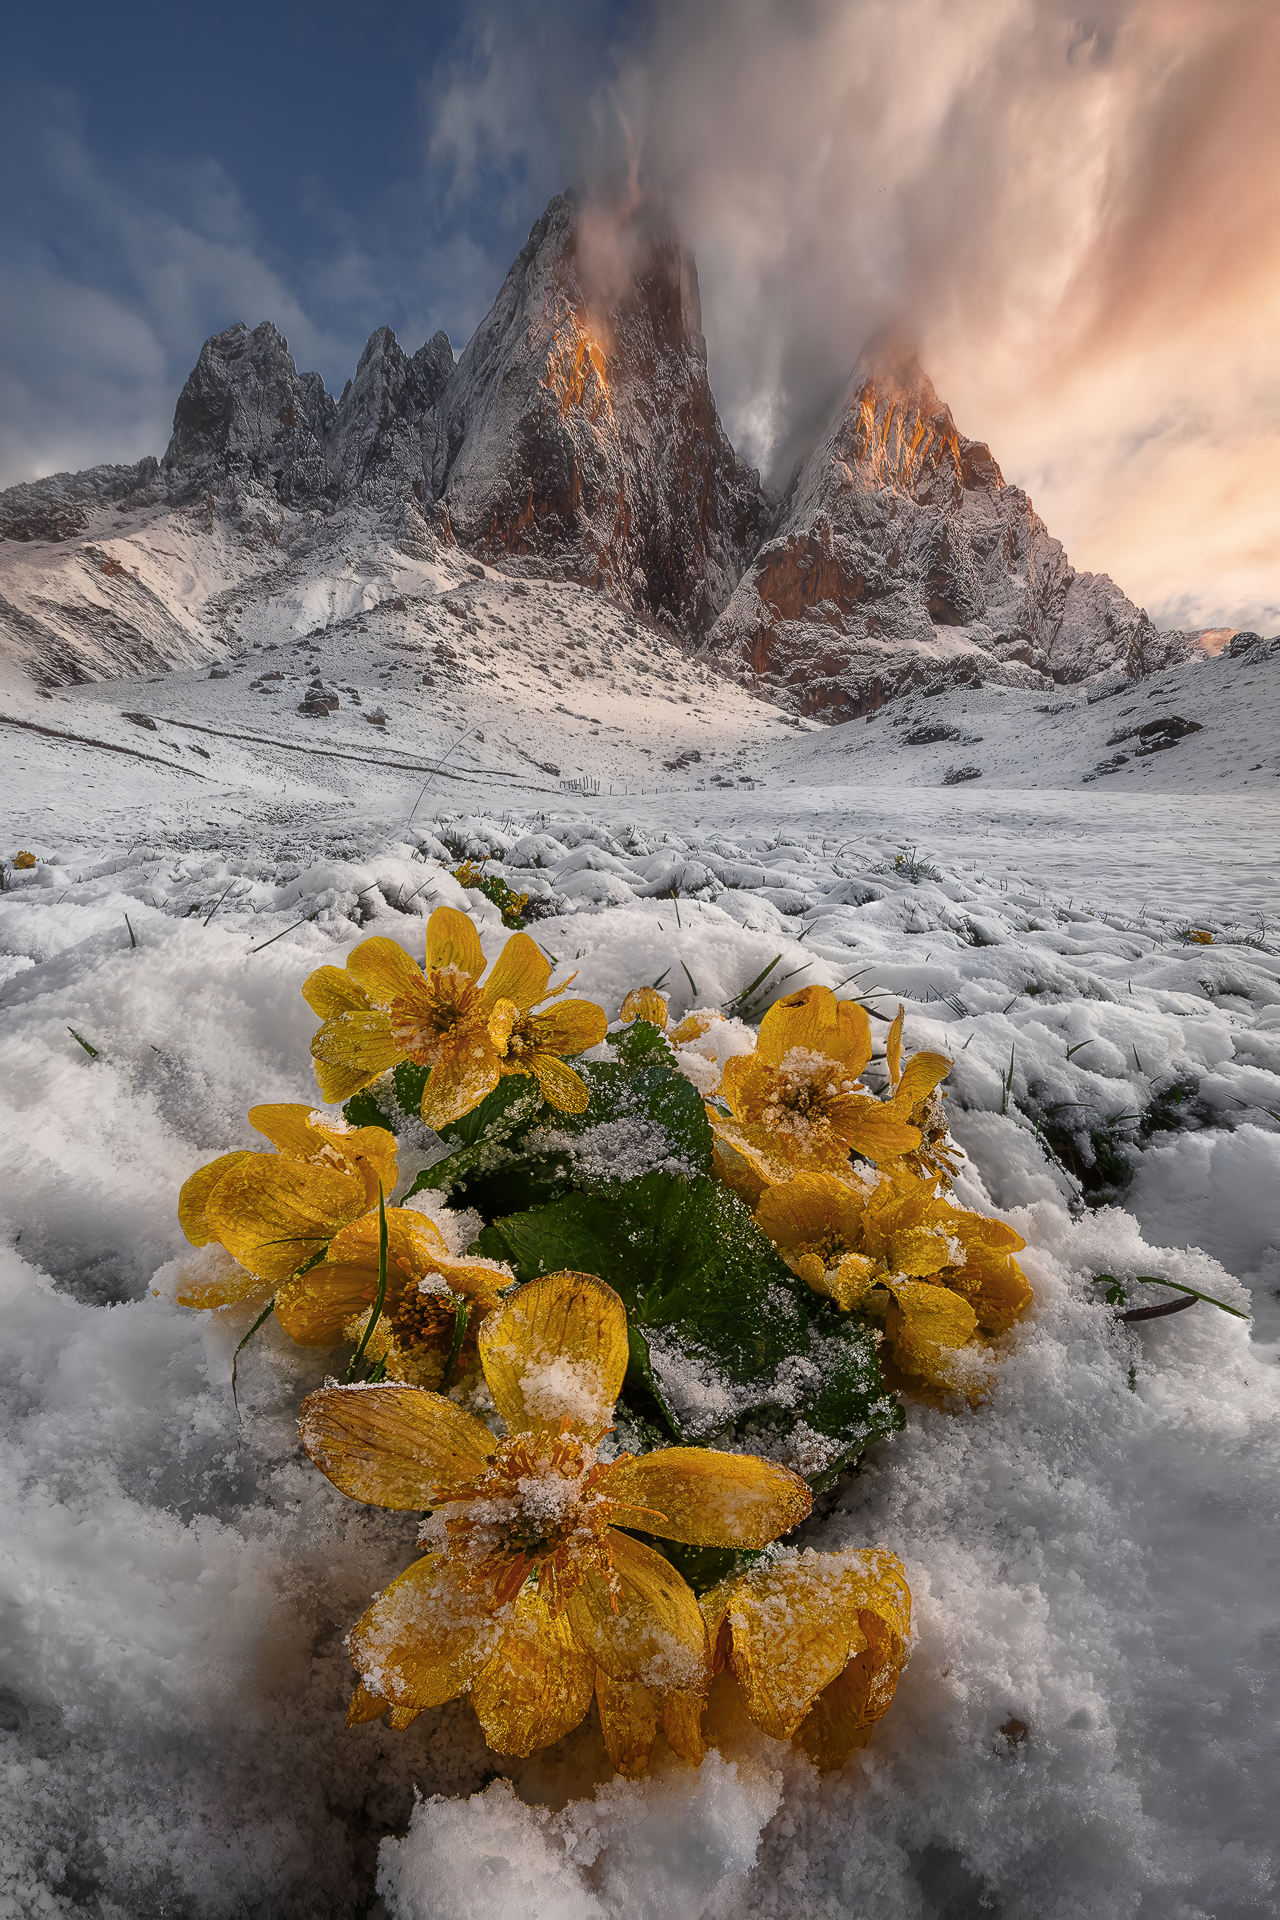 General 1280x1920 mountains snow portrait display flowers yellow clouds nature sky Dolomites